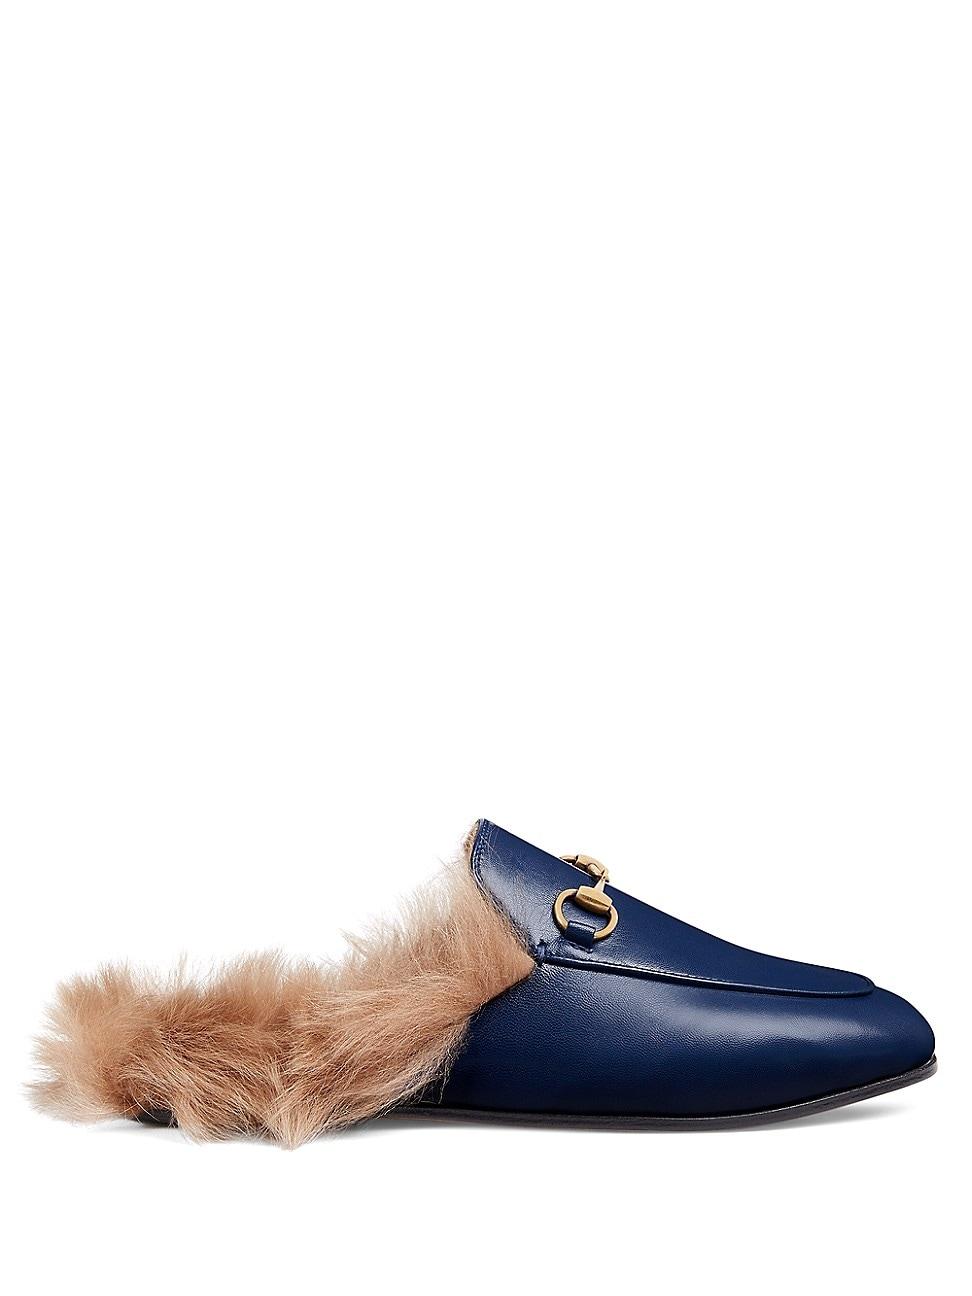 Gucci Princetown Leather Loafers With Fur in Navy (Blue) | Lyst